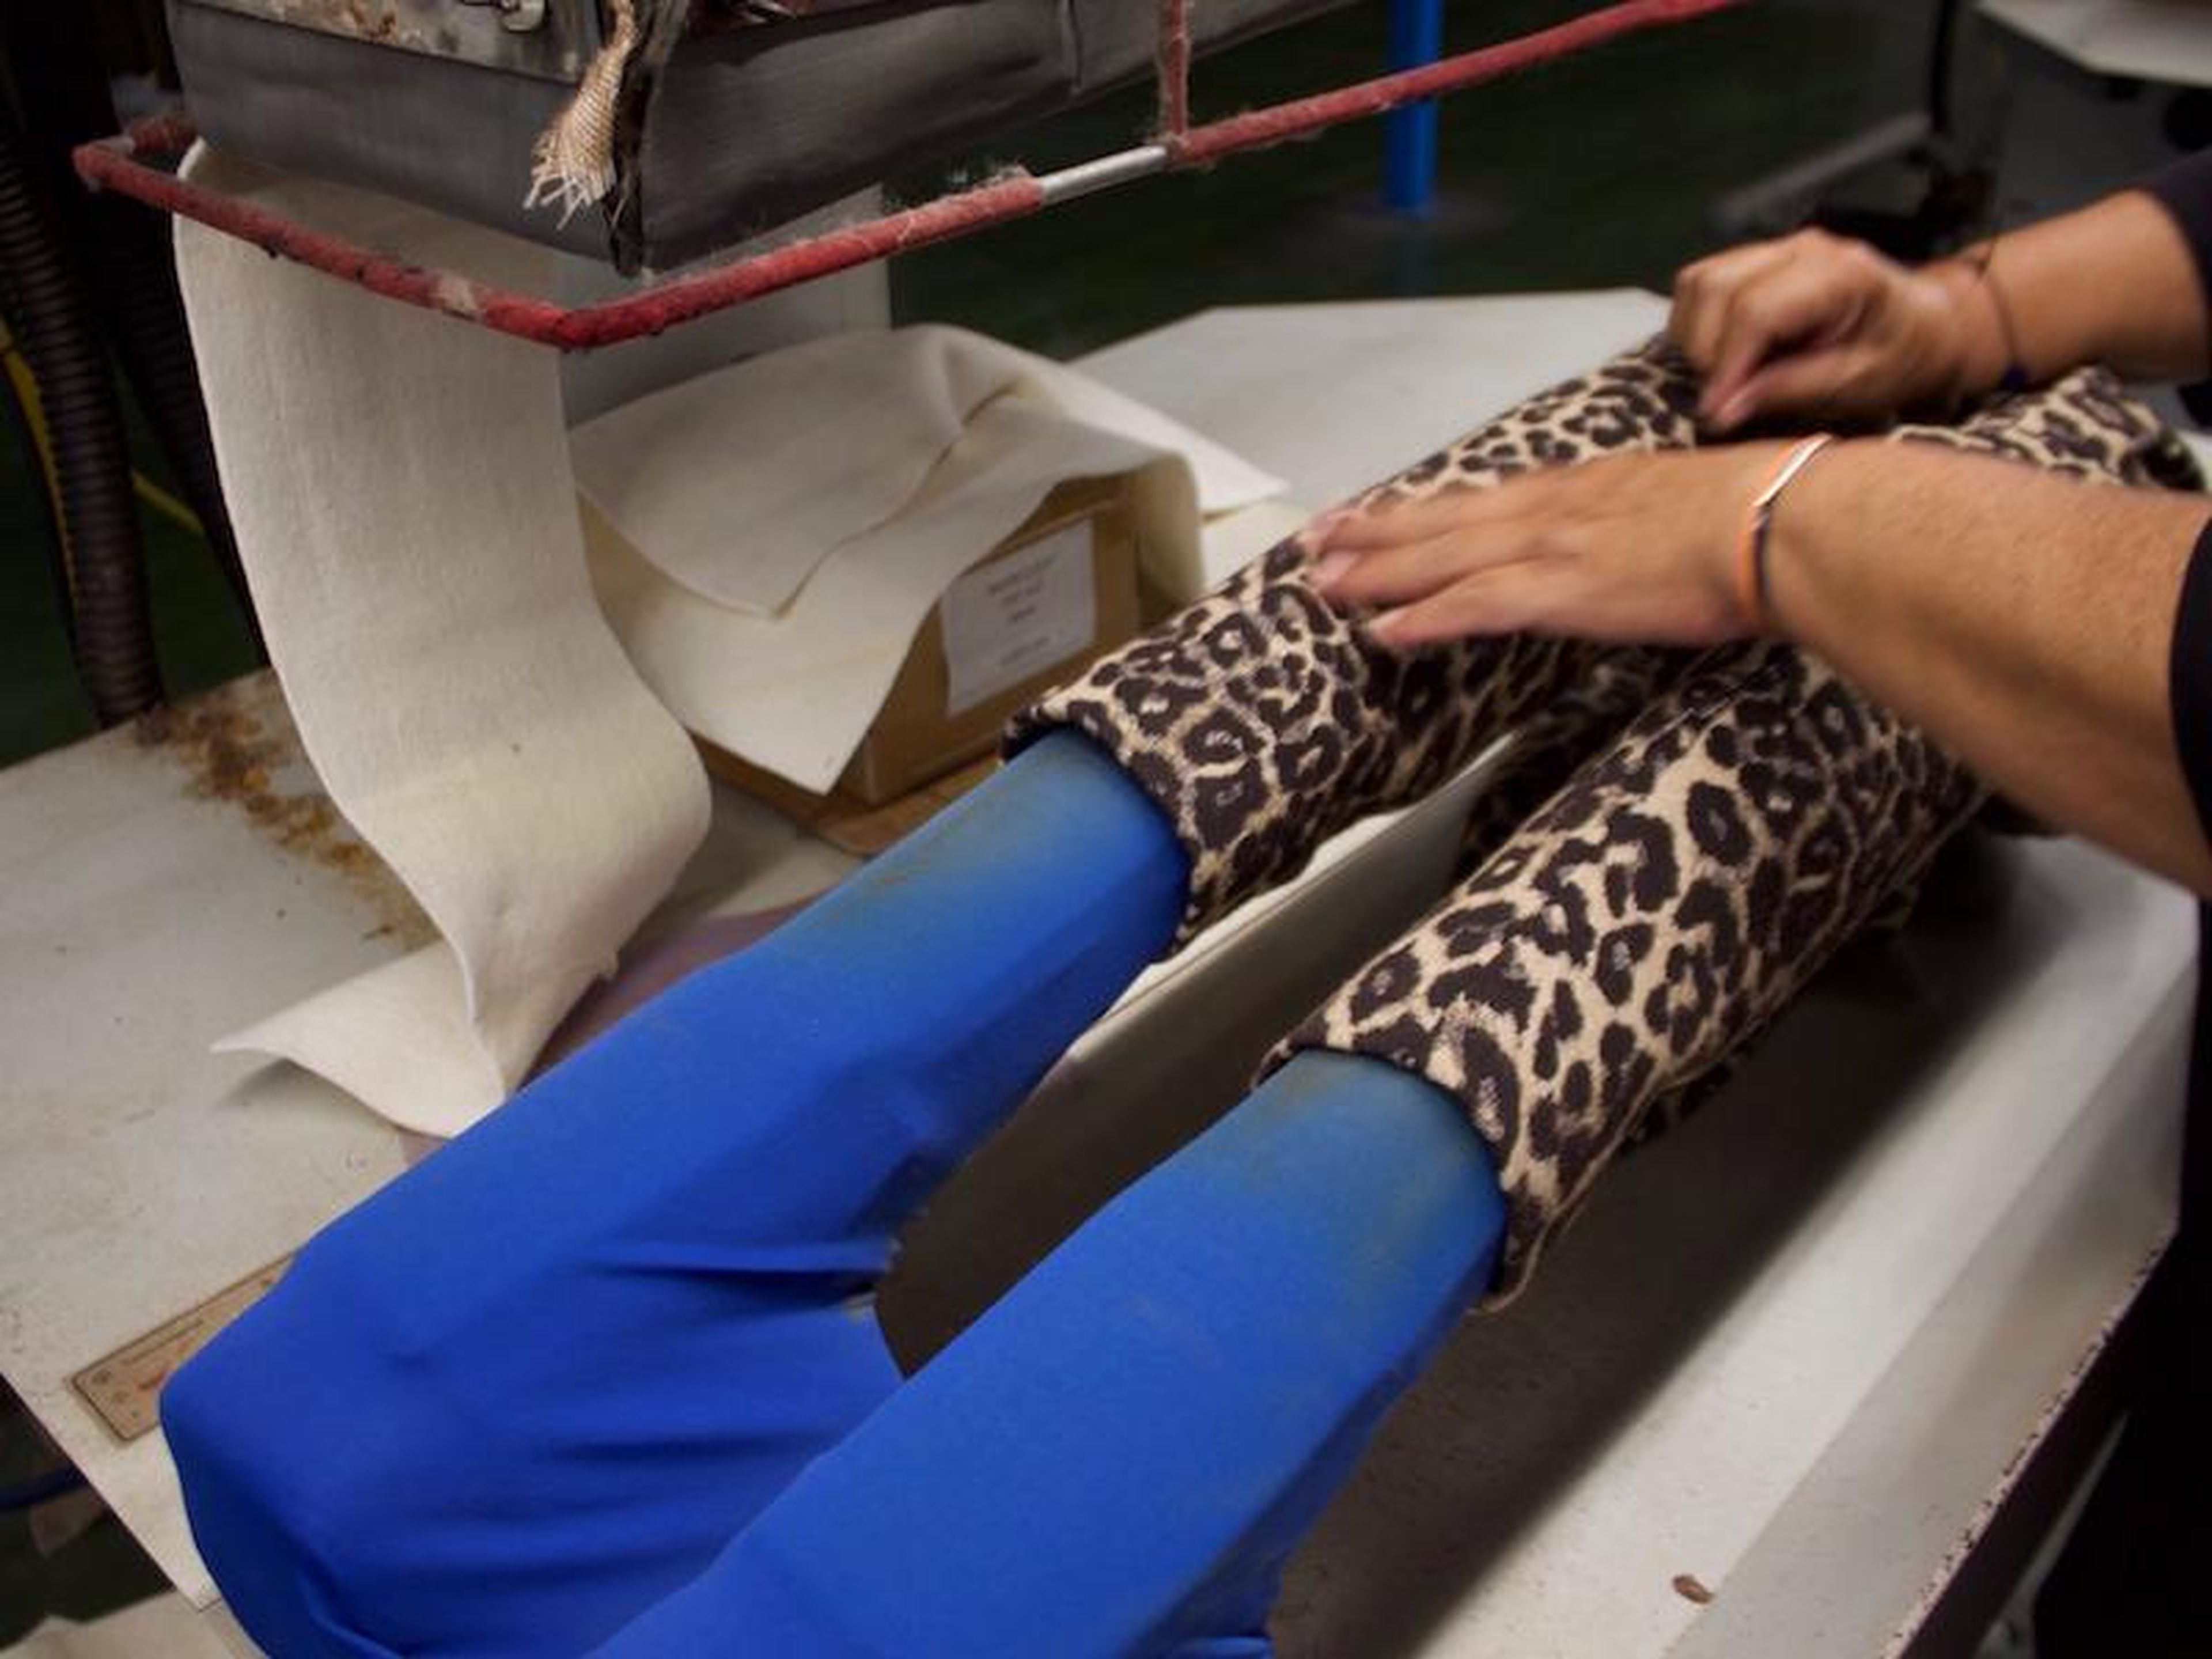 Sleeves are blasted with hot air to shape the fabric and stretch the stitching.